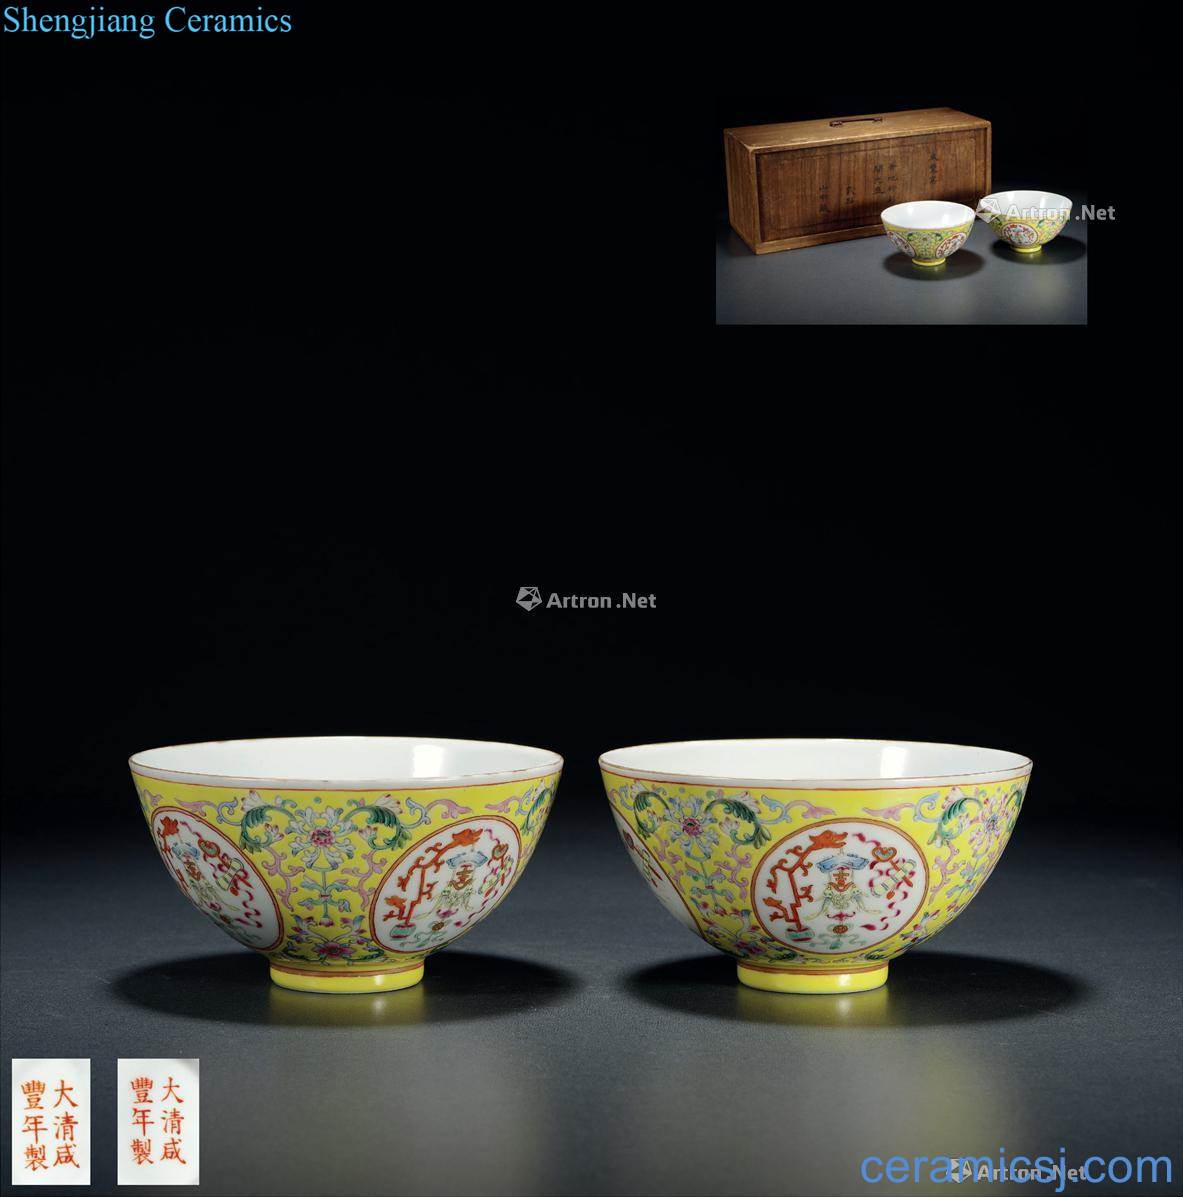 Qing qing xianfeng years, paragraph to pastel yellow window appear more auspicious bowl (a)